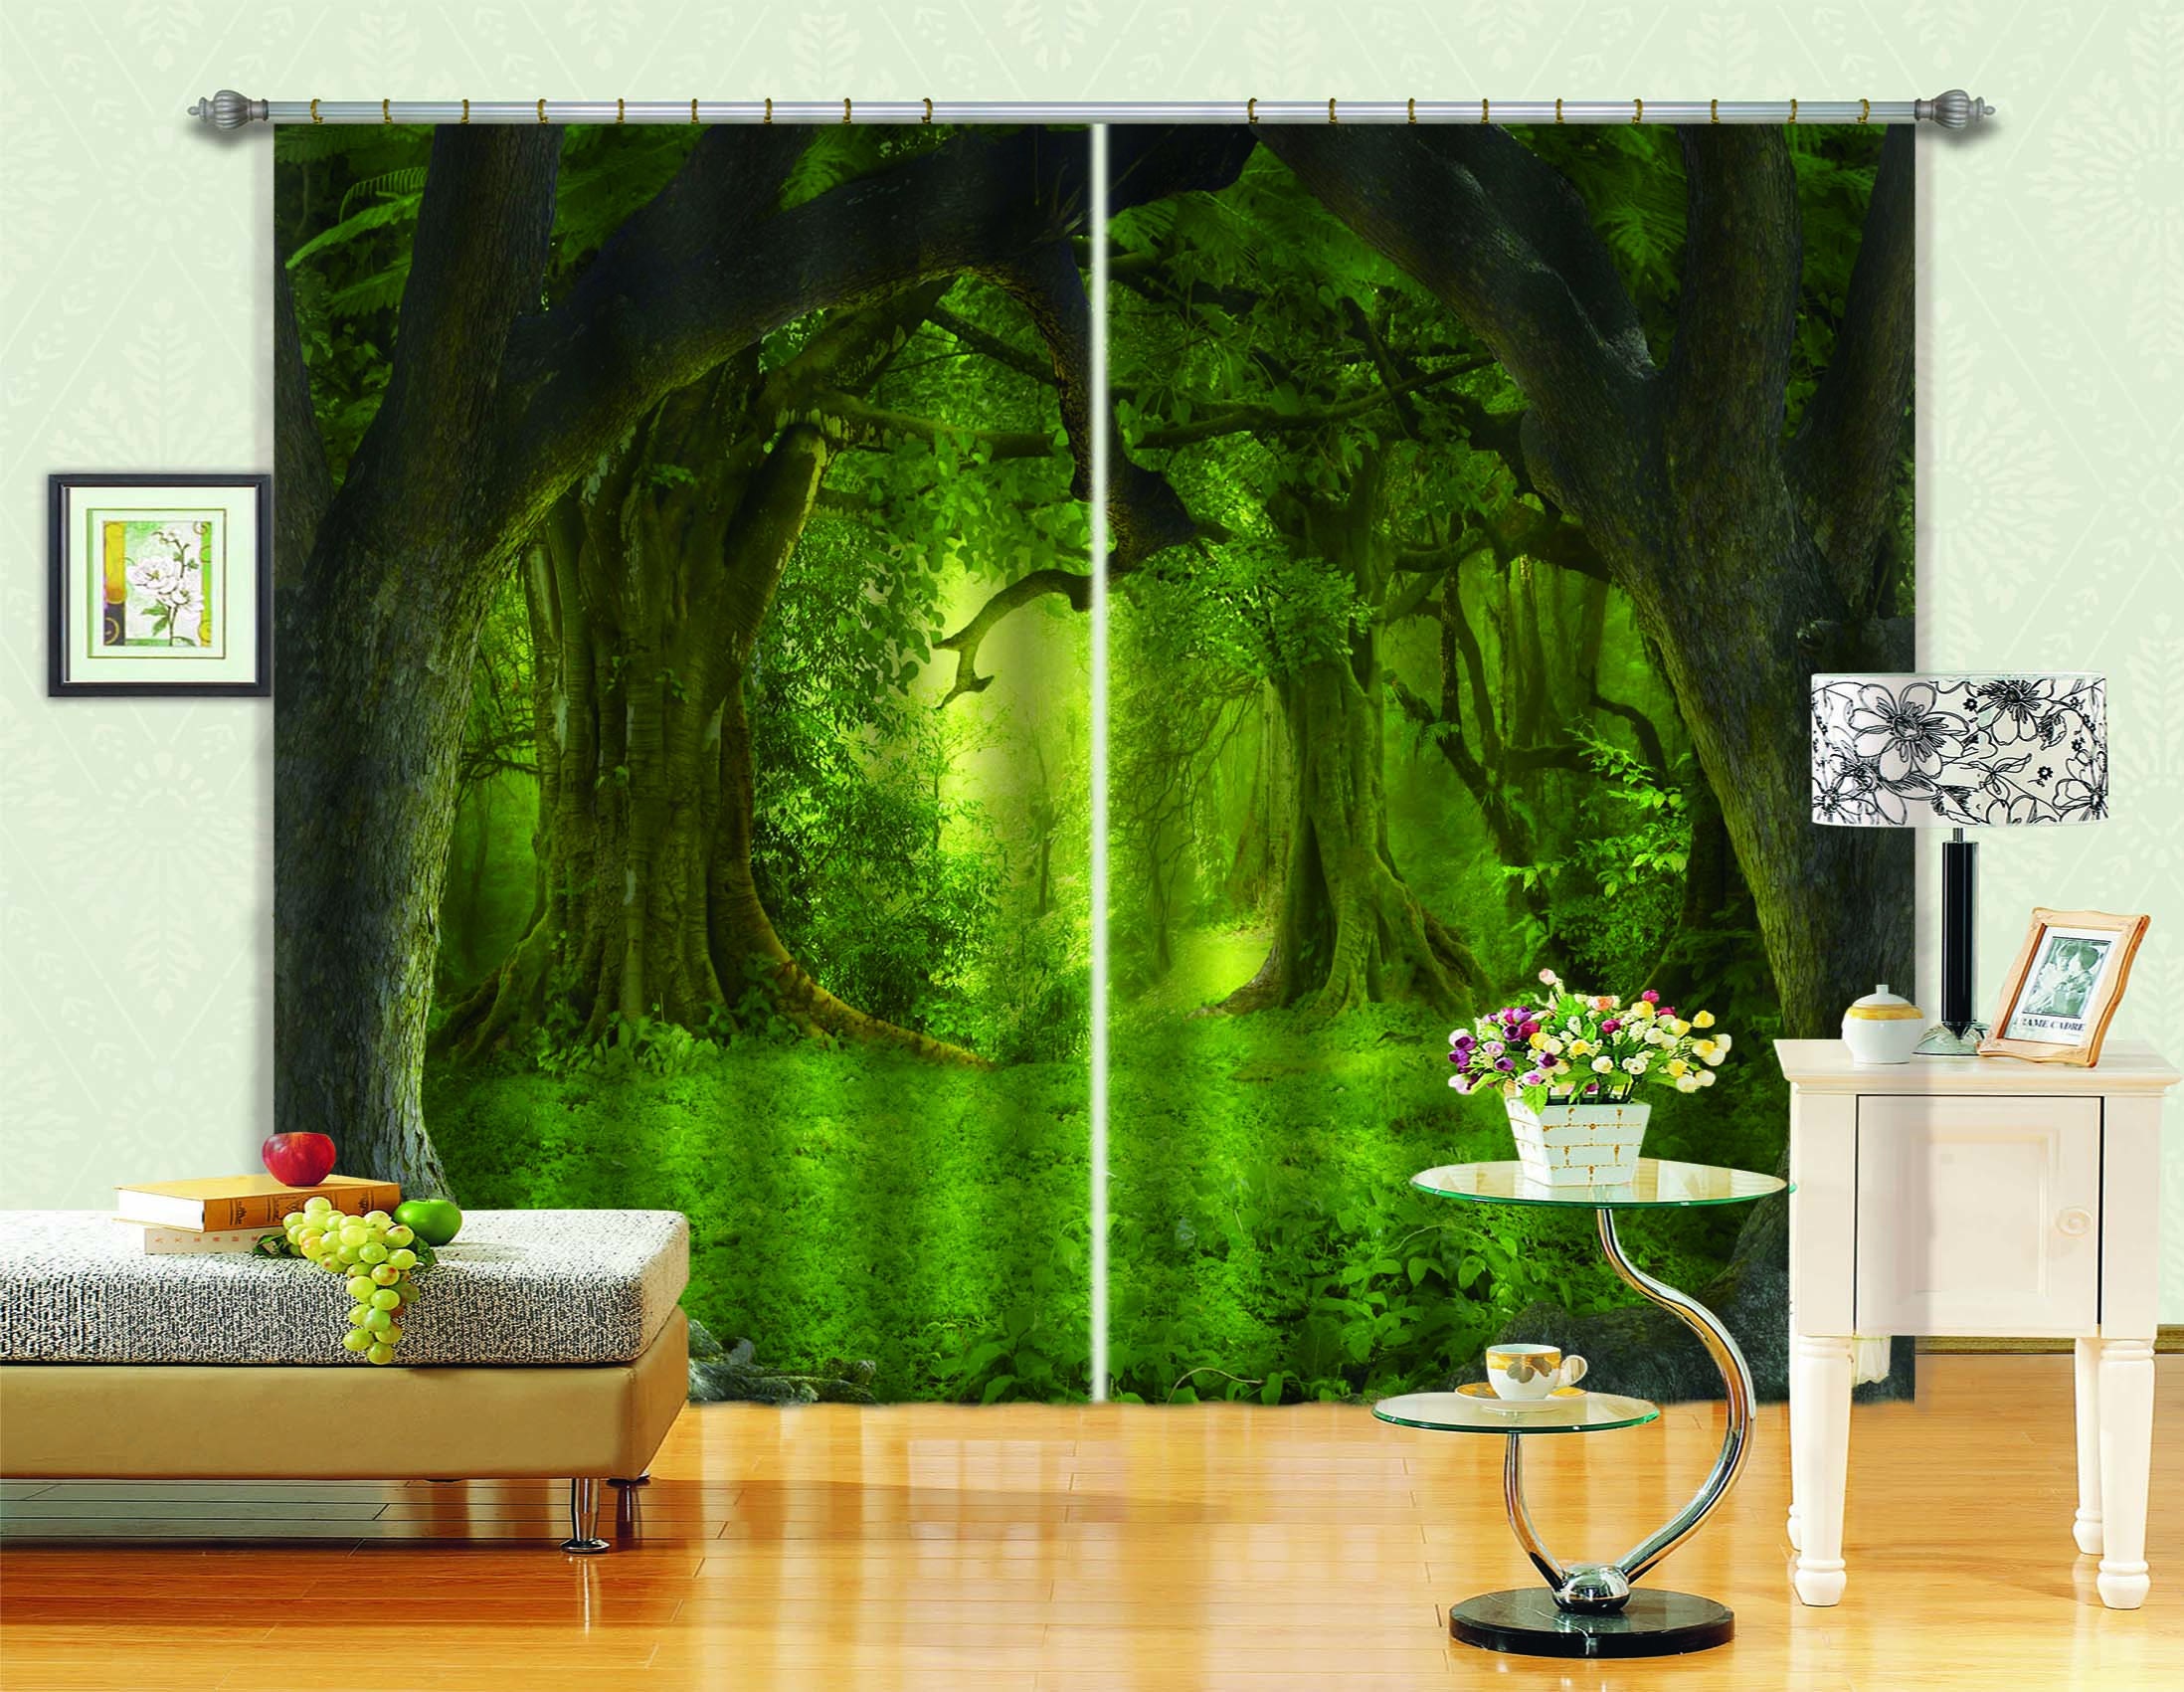 3D Blockout 2 Panel Set Window Curtain-Mountain Forest River Photo Fabric Drapes 